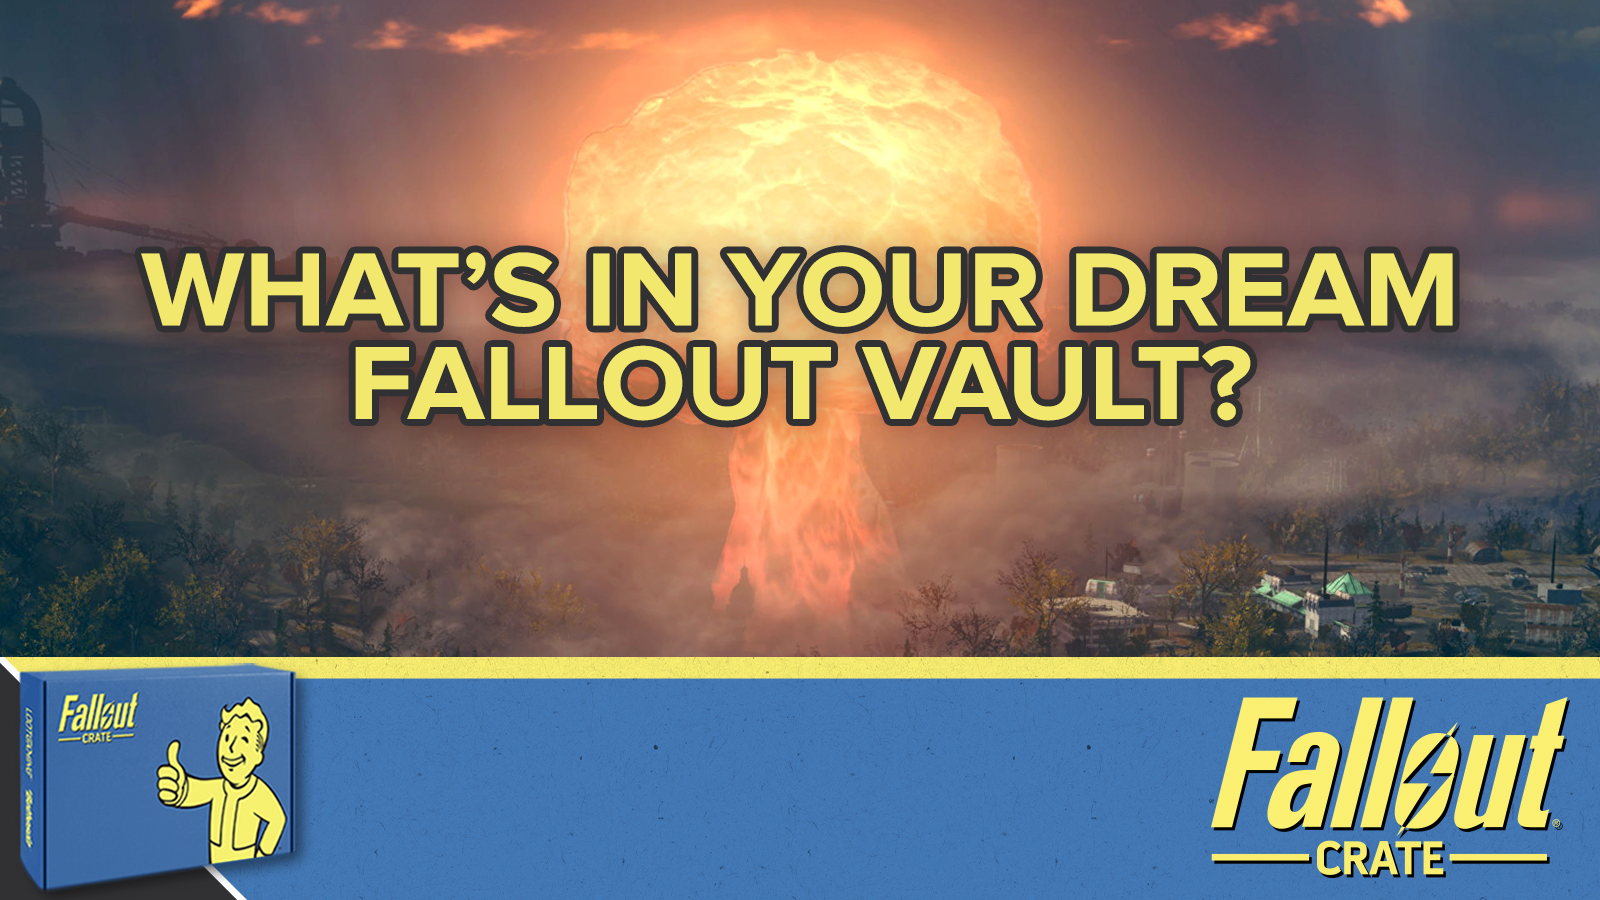 The Daily Crate | The Winners of Our Fallout Bomb Drop Day Contest